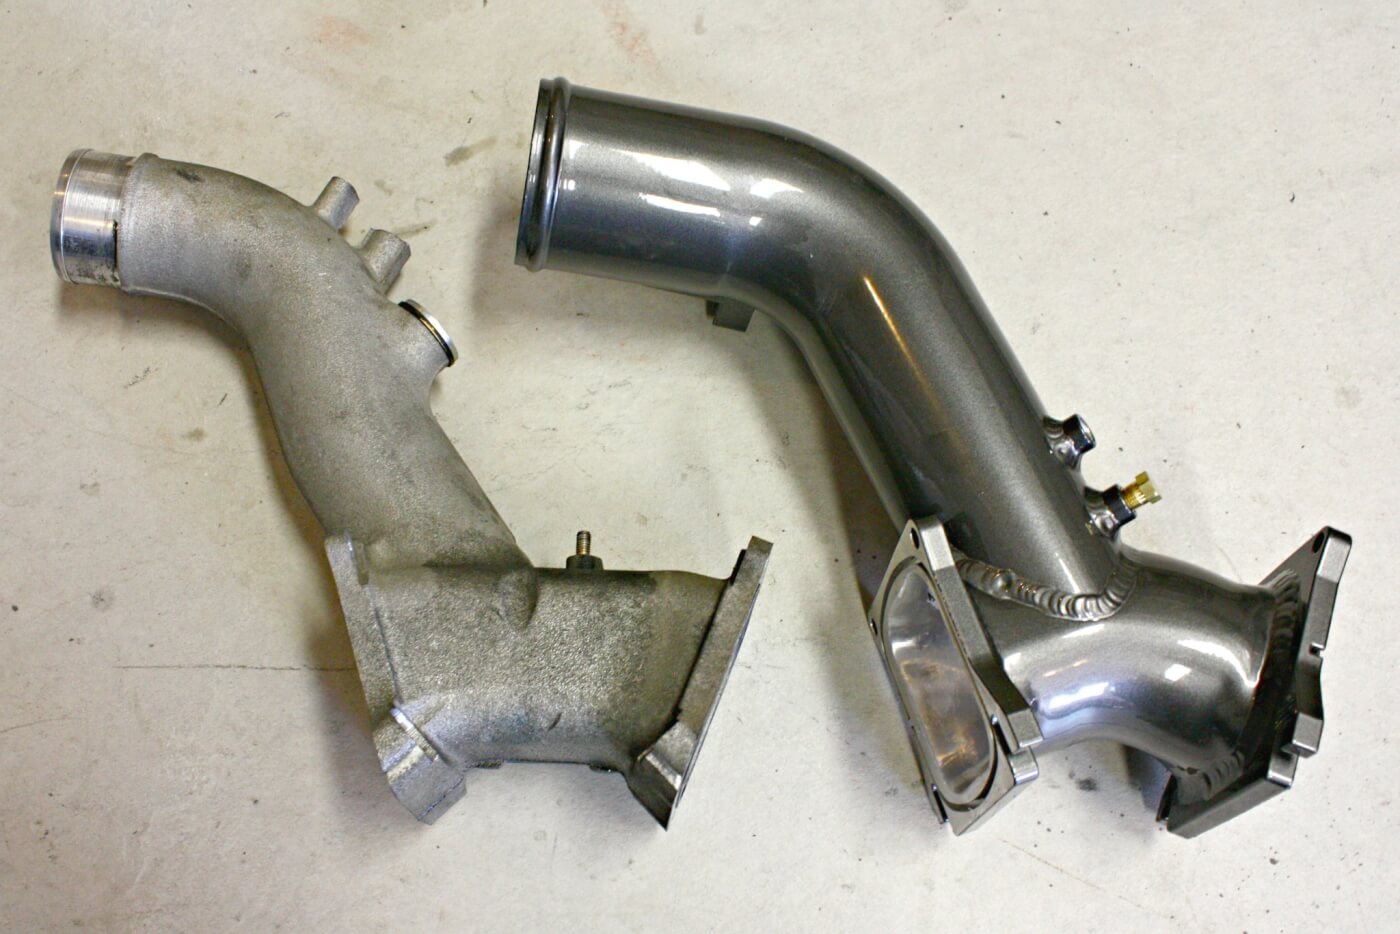 4. The factory Y-bridge uses a 2.5-inch inlet to feed air into both cylinder heads. The cast aluminum piece is also outfitted with an air intake heater that blocks the passageway inside the already small-diameter bridge. To increase overall airflow for larger aftermarket turbo and reduce restriction within the system, HSP Diesel hand fabricates a larger, 3-inch Y-bridge that eliminates the air-intake heater and offers smoother transitions to eliminate air turbulence before the cylinders.